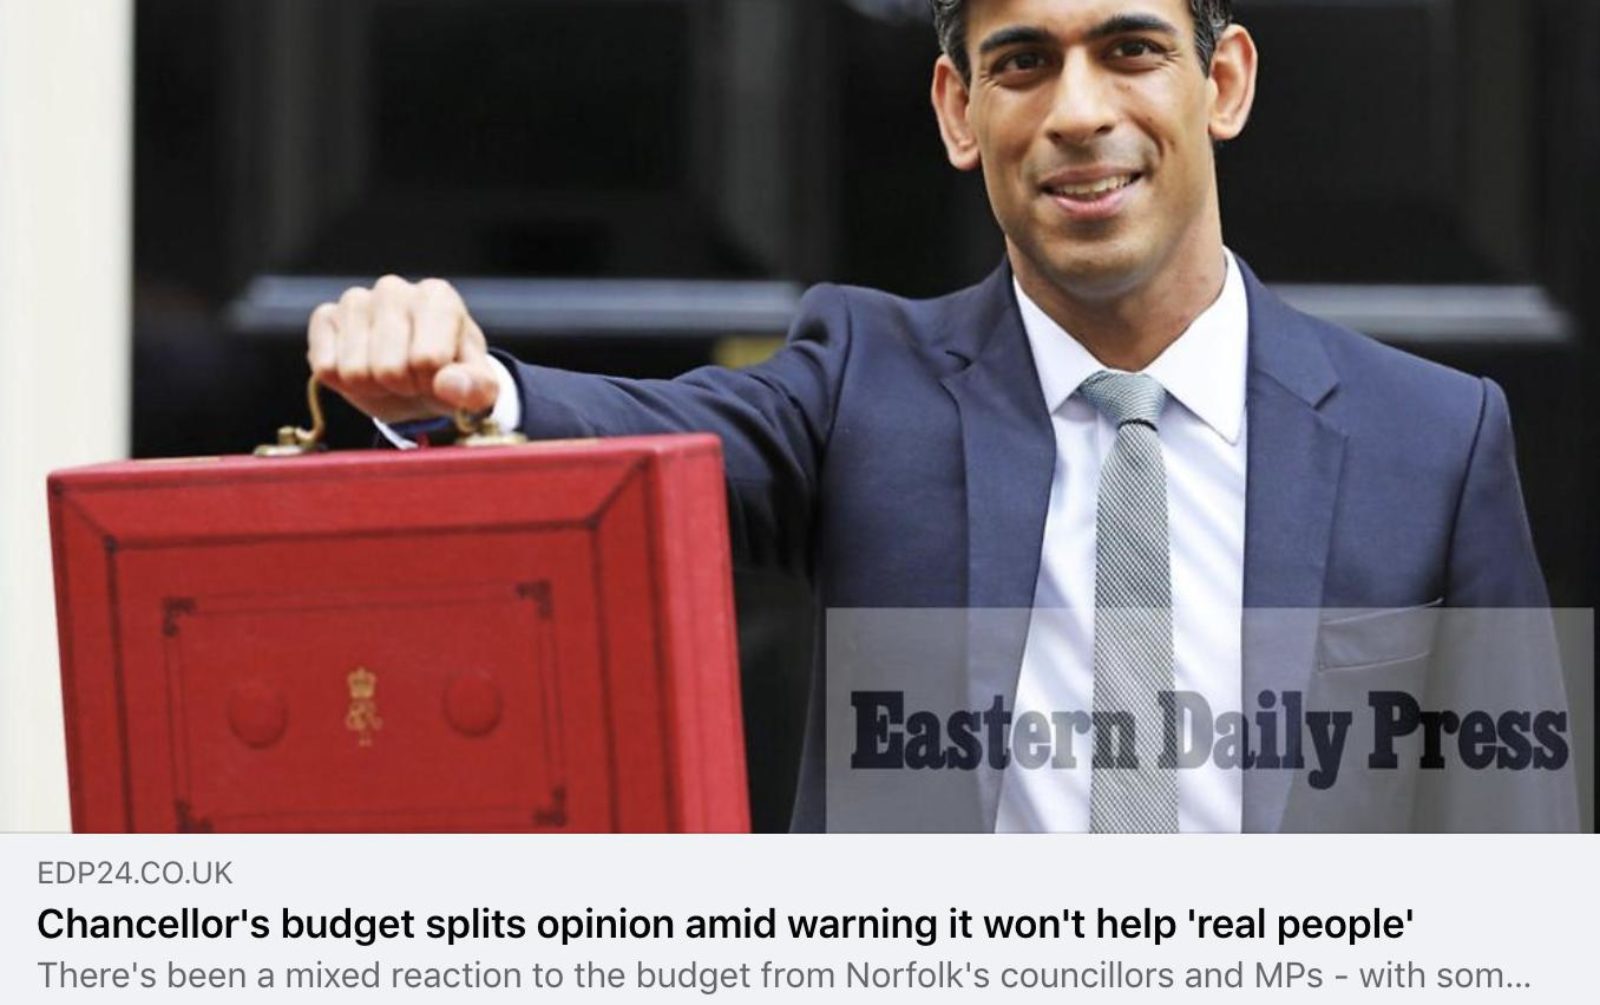 Image shows a news article with a picture of Rishi Sunak holding a red briefcase